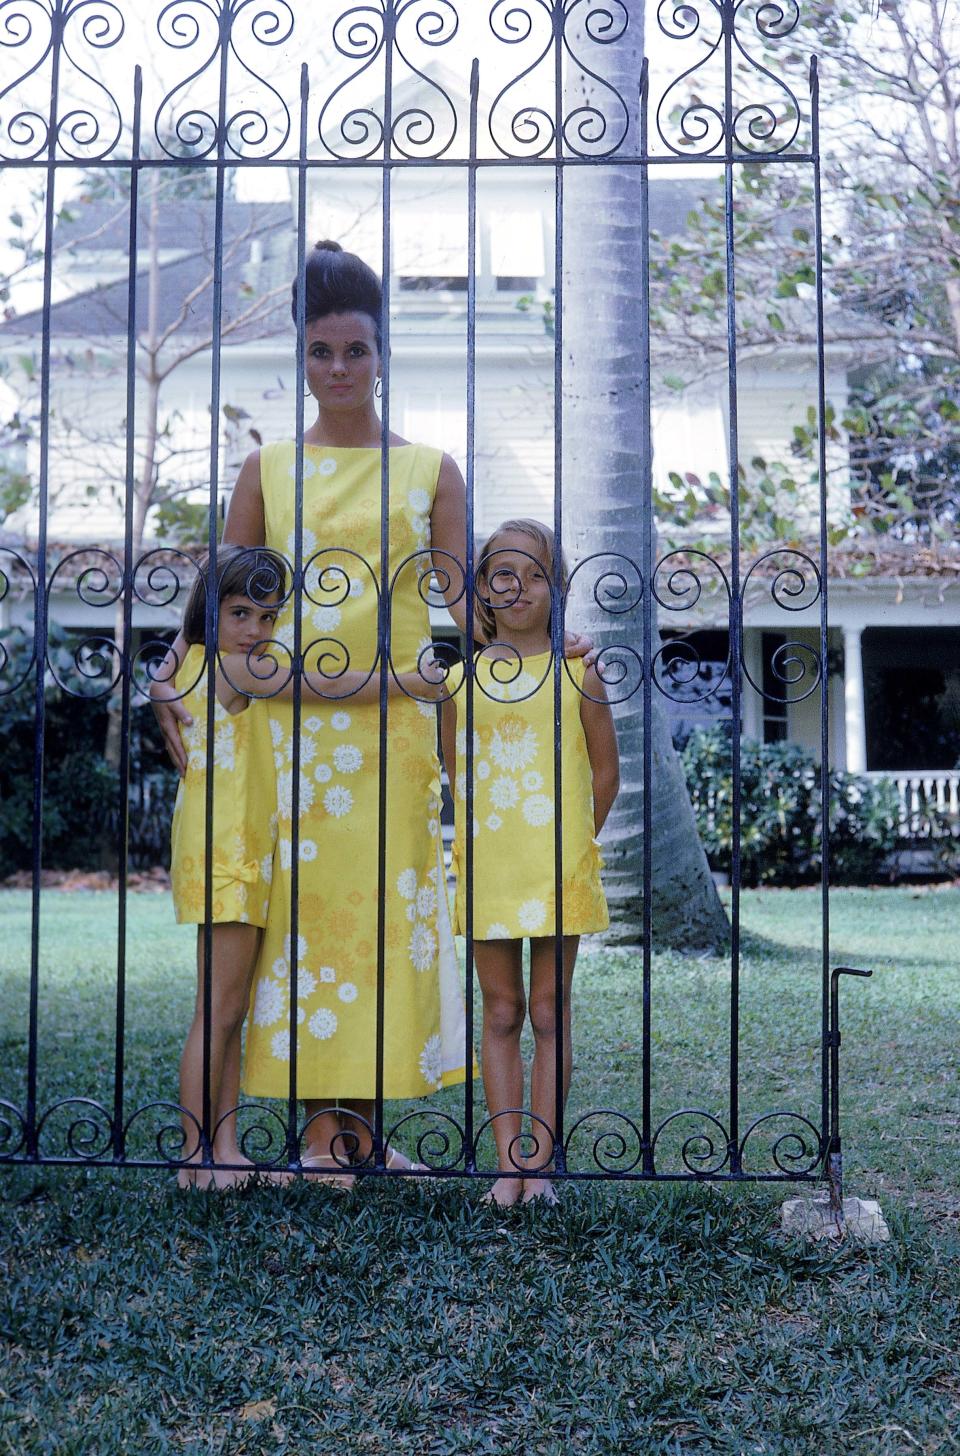 Lilly Pulitzer (center) stands with her daughters Liza (left) and Minnie outside of their Palm Beach home on South Lake Trail in 1963. Their yellow-patterned dresses with white trim have now become an iconic vintage look for which the Lilly Pulitzer brand is known.